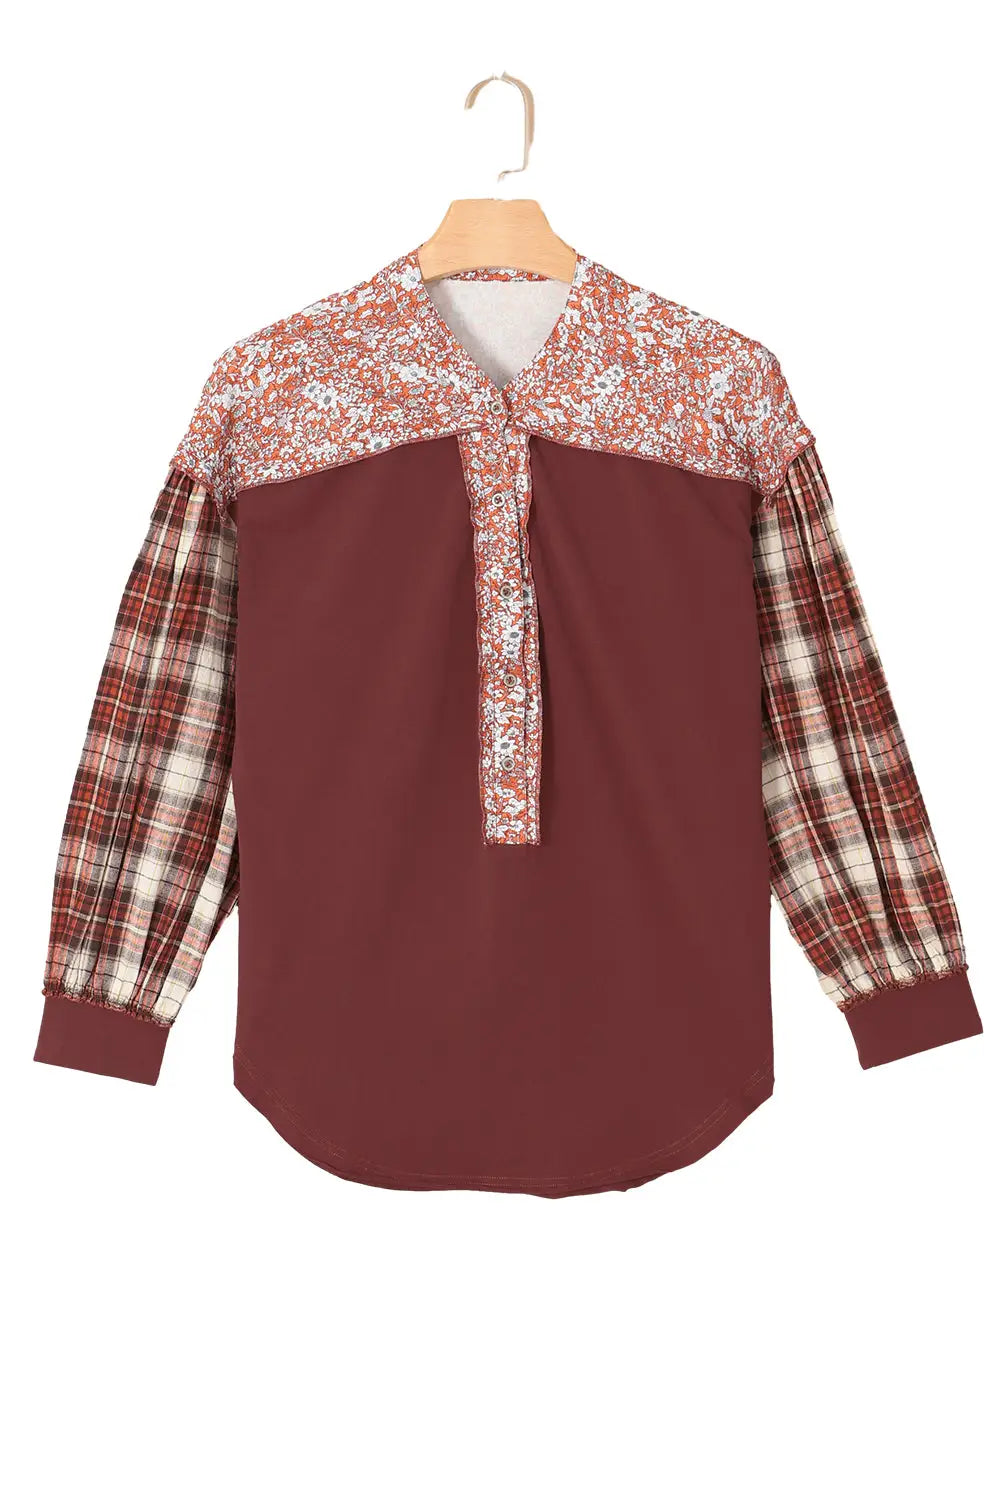 Red dahlia mixed print half buttons plus size pullover top